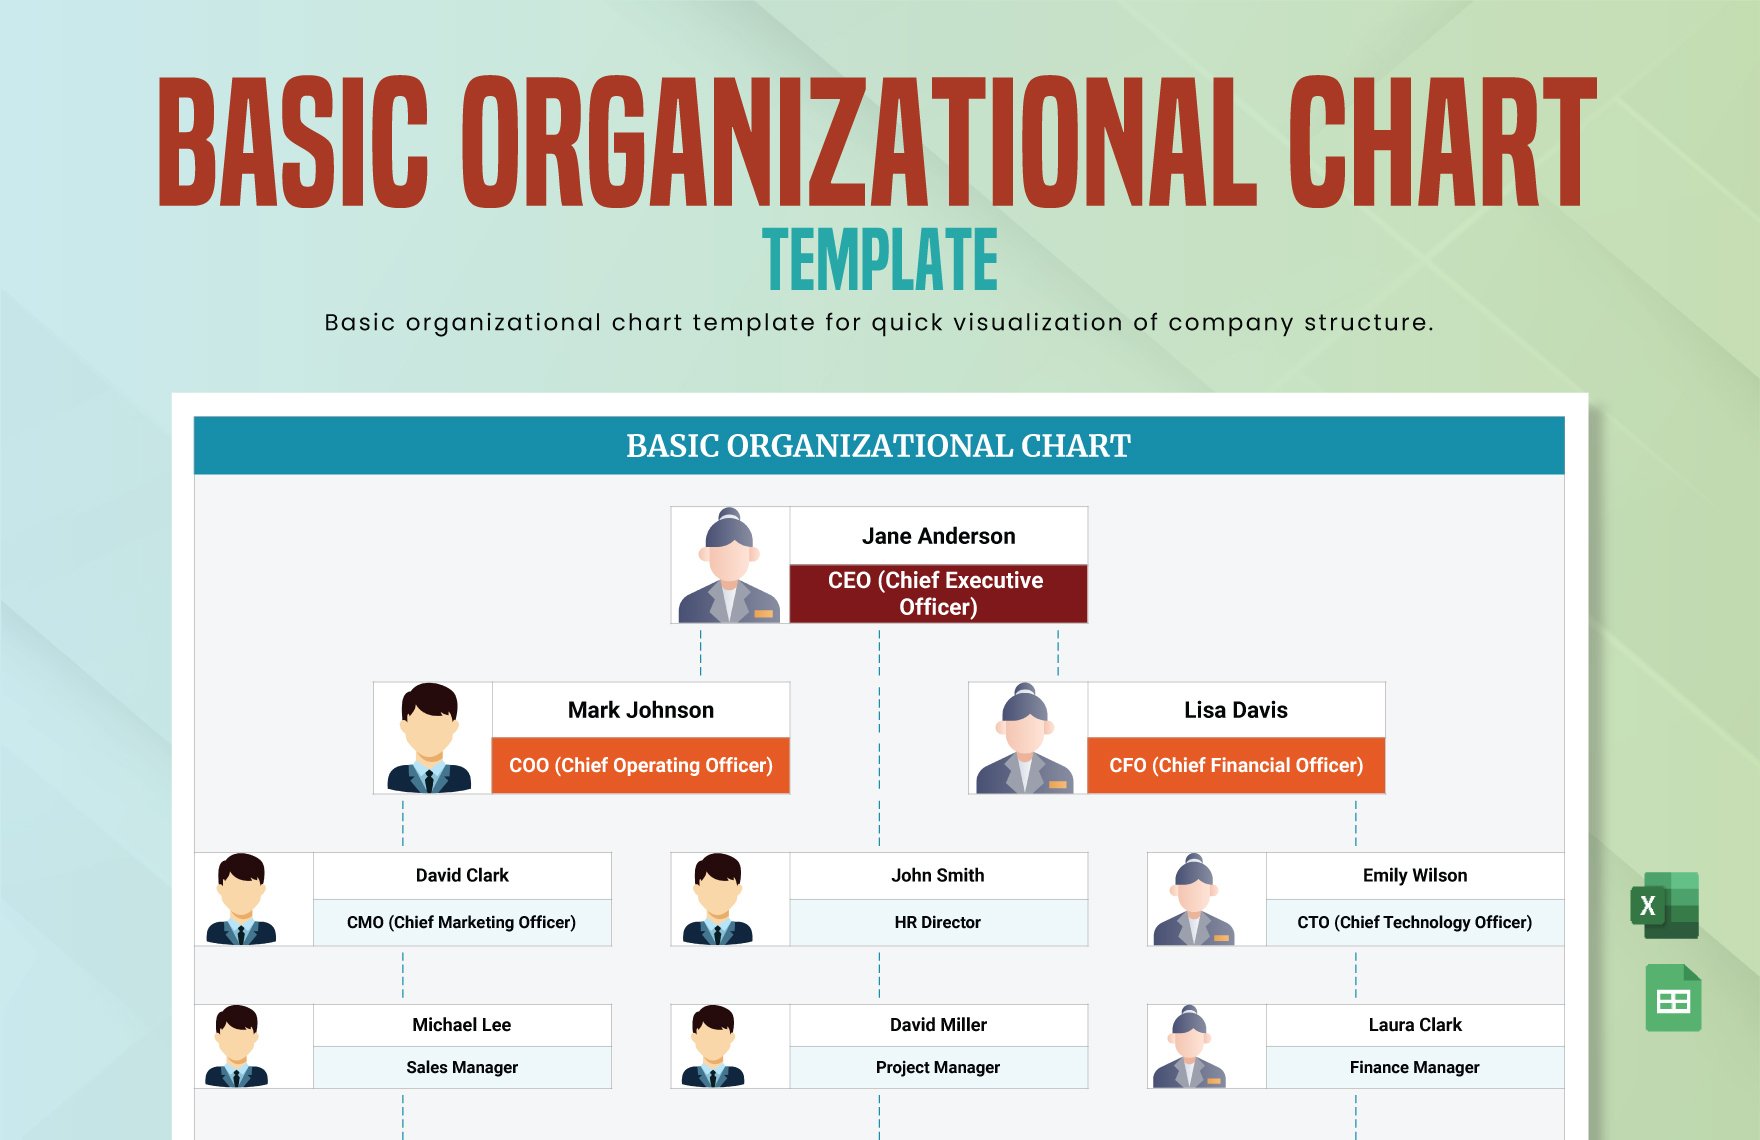 Basic Organizational Chart Template in Excel, Google Sheets